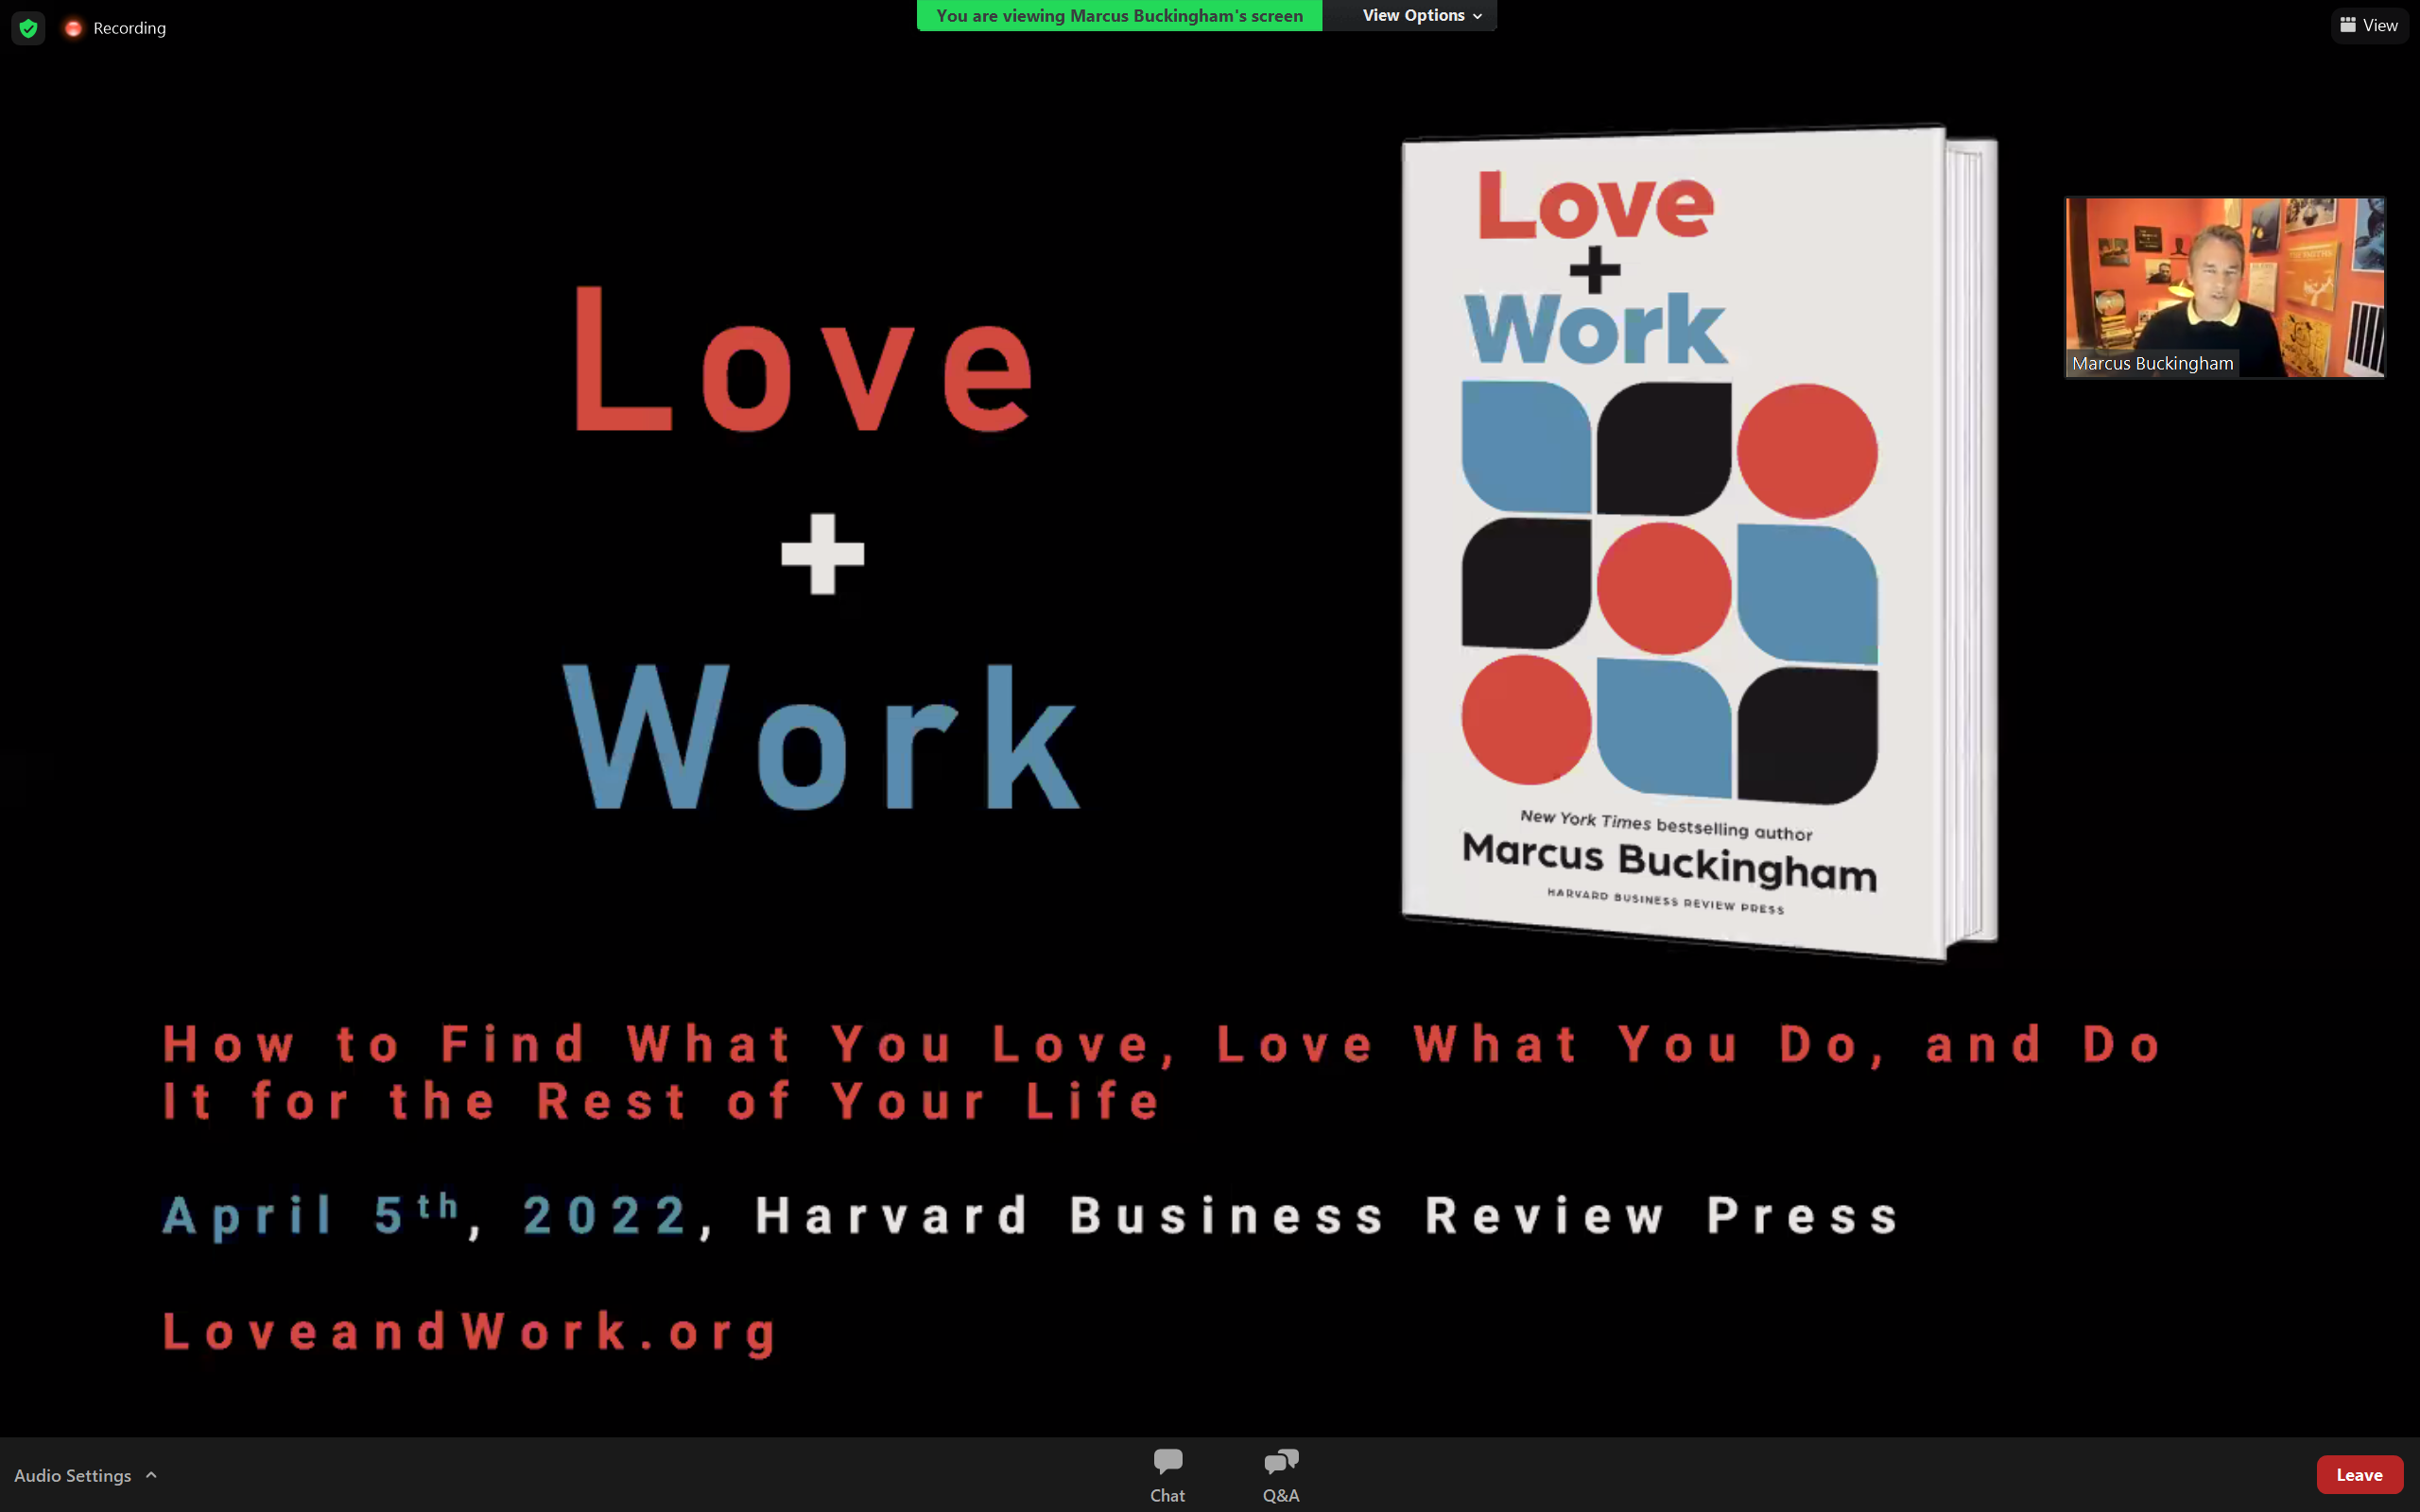 Marcus Buckingham Shares How To Find Your 'Red Thread' In His Book Love+Work